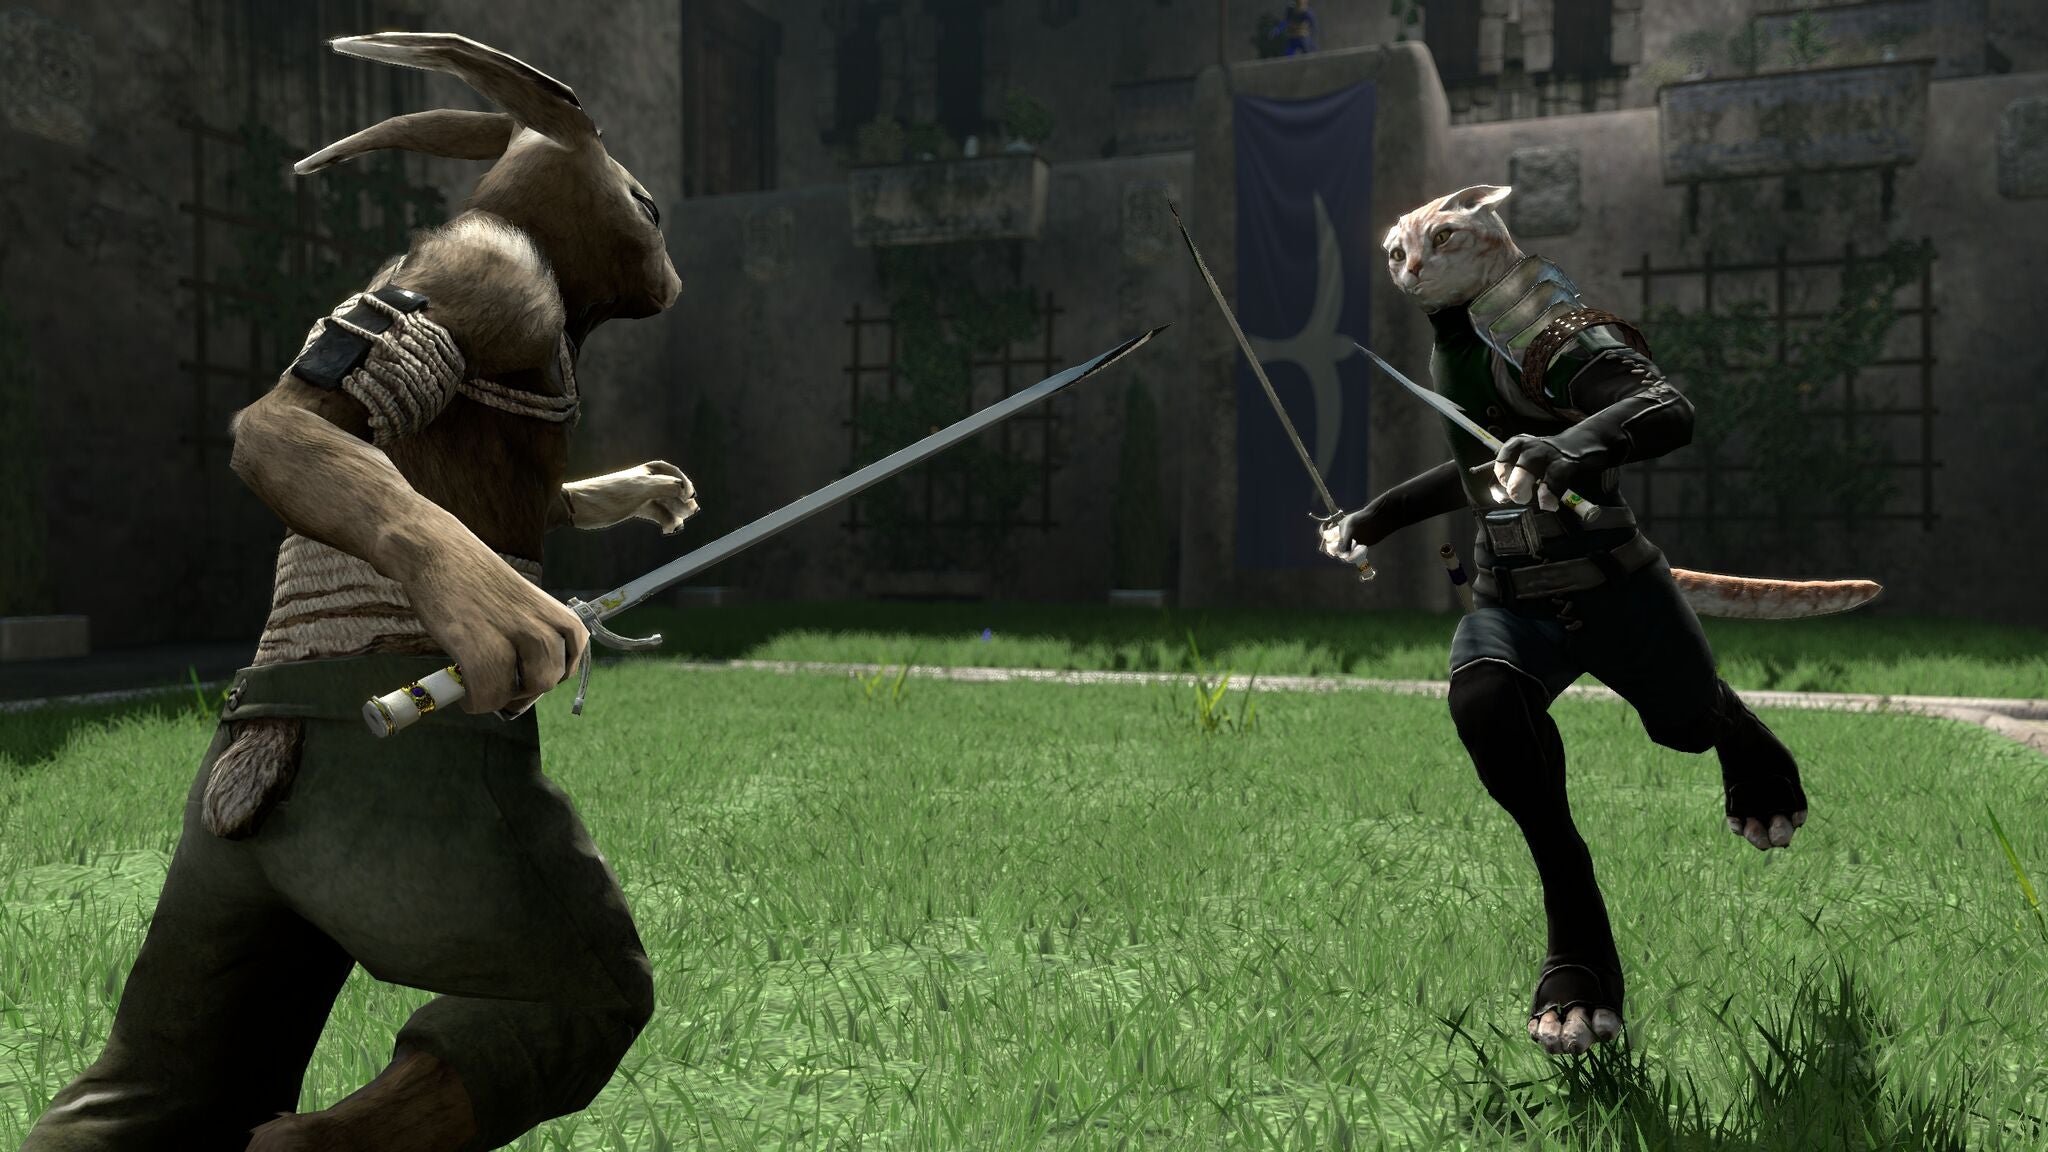 A screenshot of Overgrowth in which an anthropomorphic cat holding two blades rushes towards a shirtless, anthro bunny holding one sword.